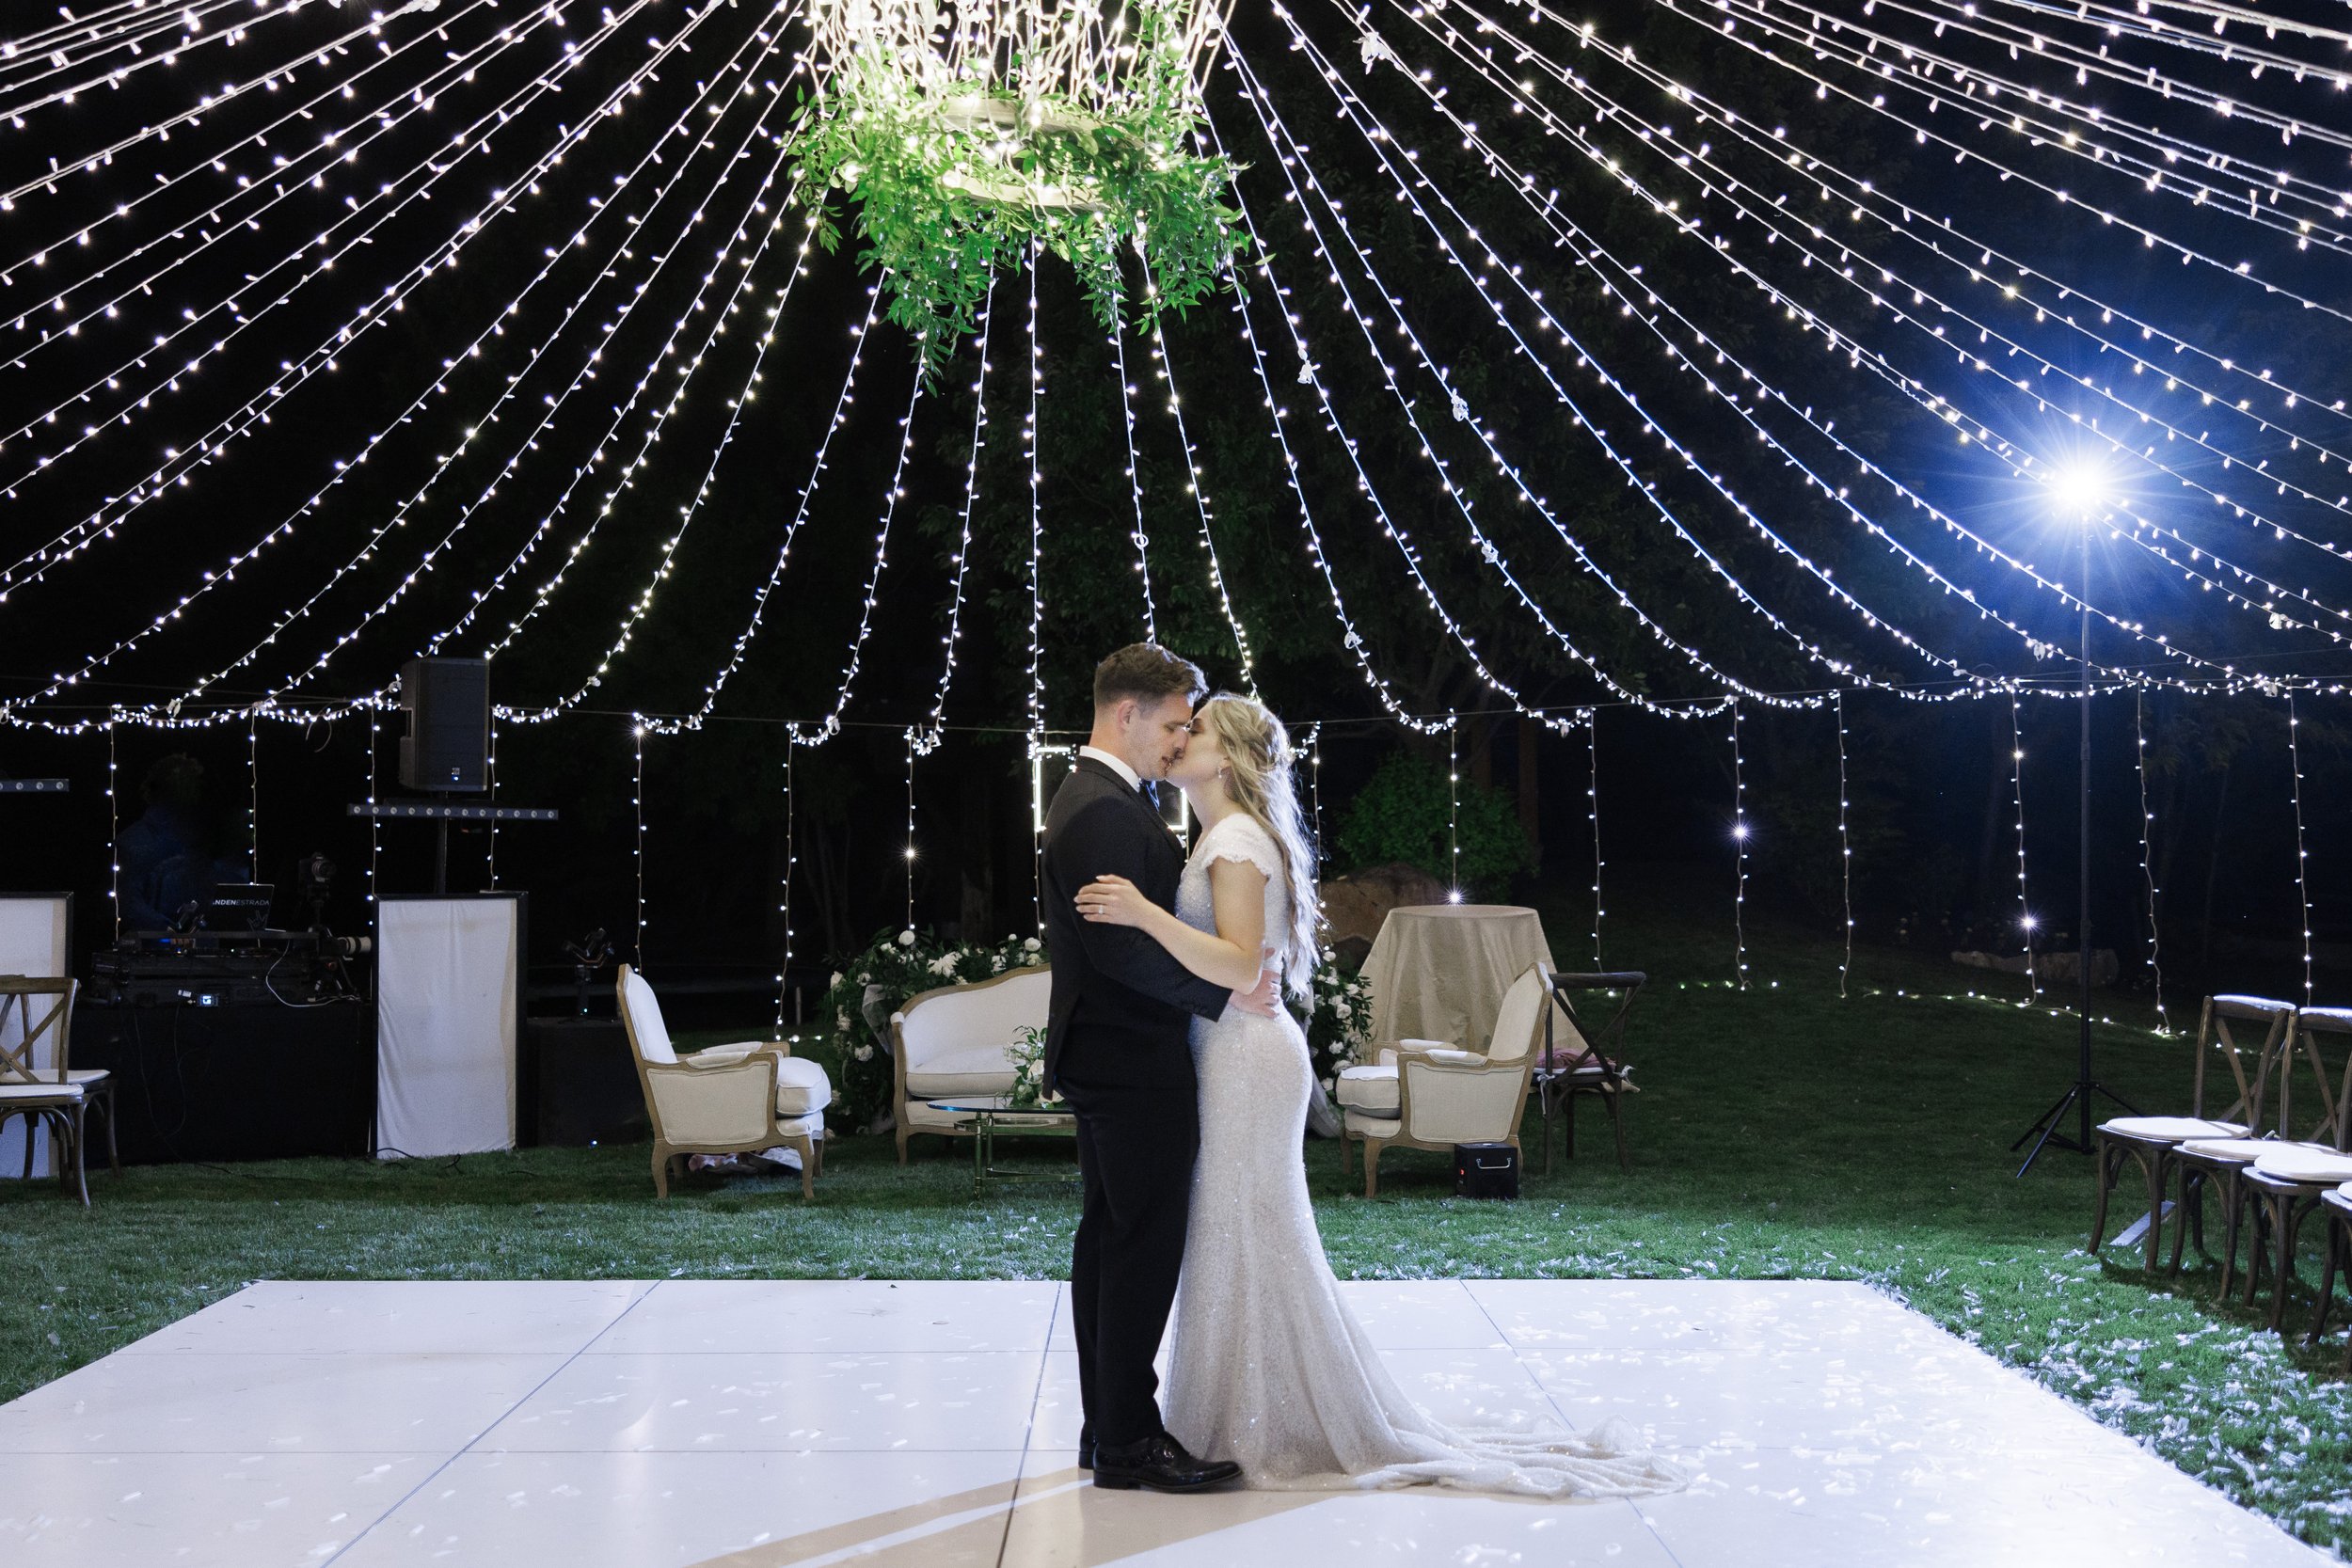  Husband and wife kissing on the dance floor under the canopy of white lights at Tony Grove in Cache Valley. #outdoorweddingreception #kissingposes #newlyweds #weddingdancefloor #receptiondecorationinspo #savannarichardsonphotography #cachevalley 